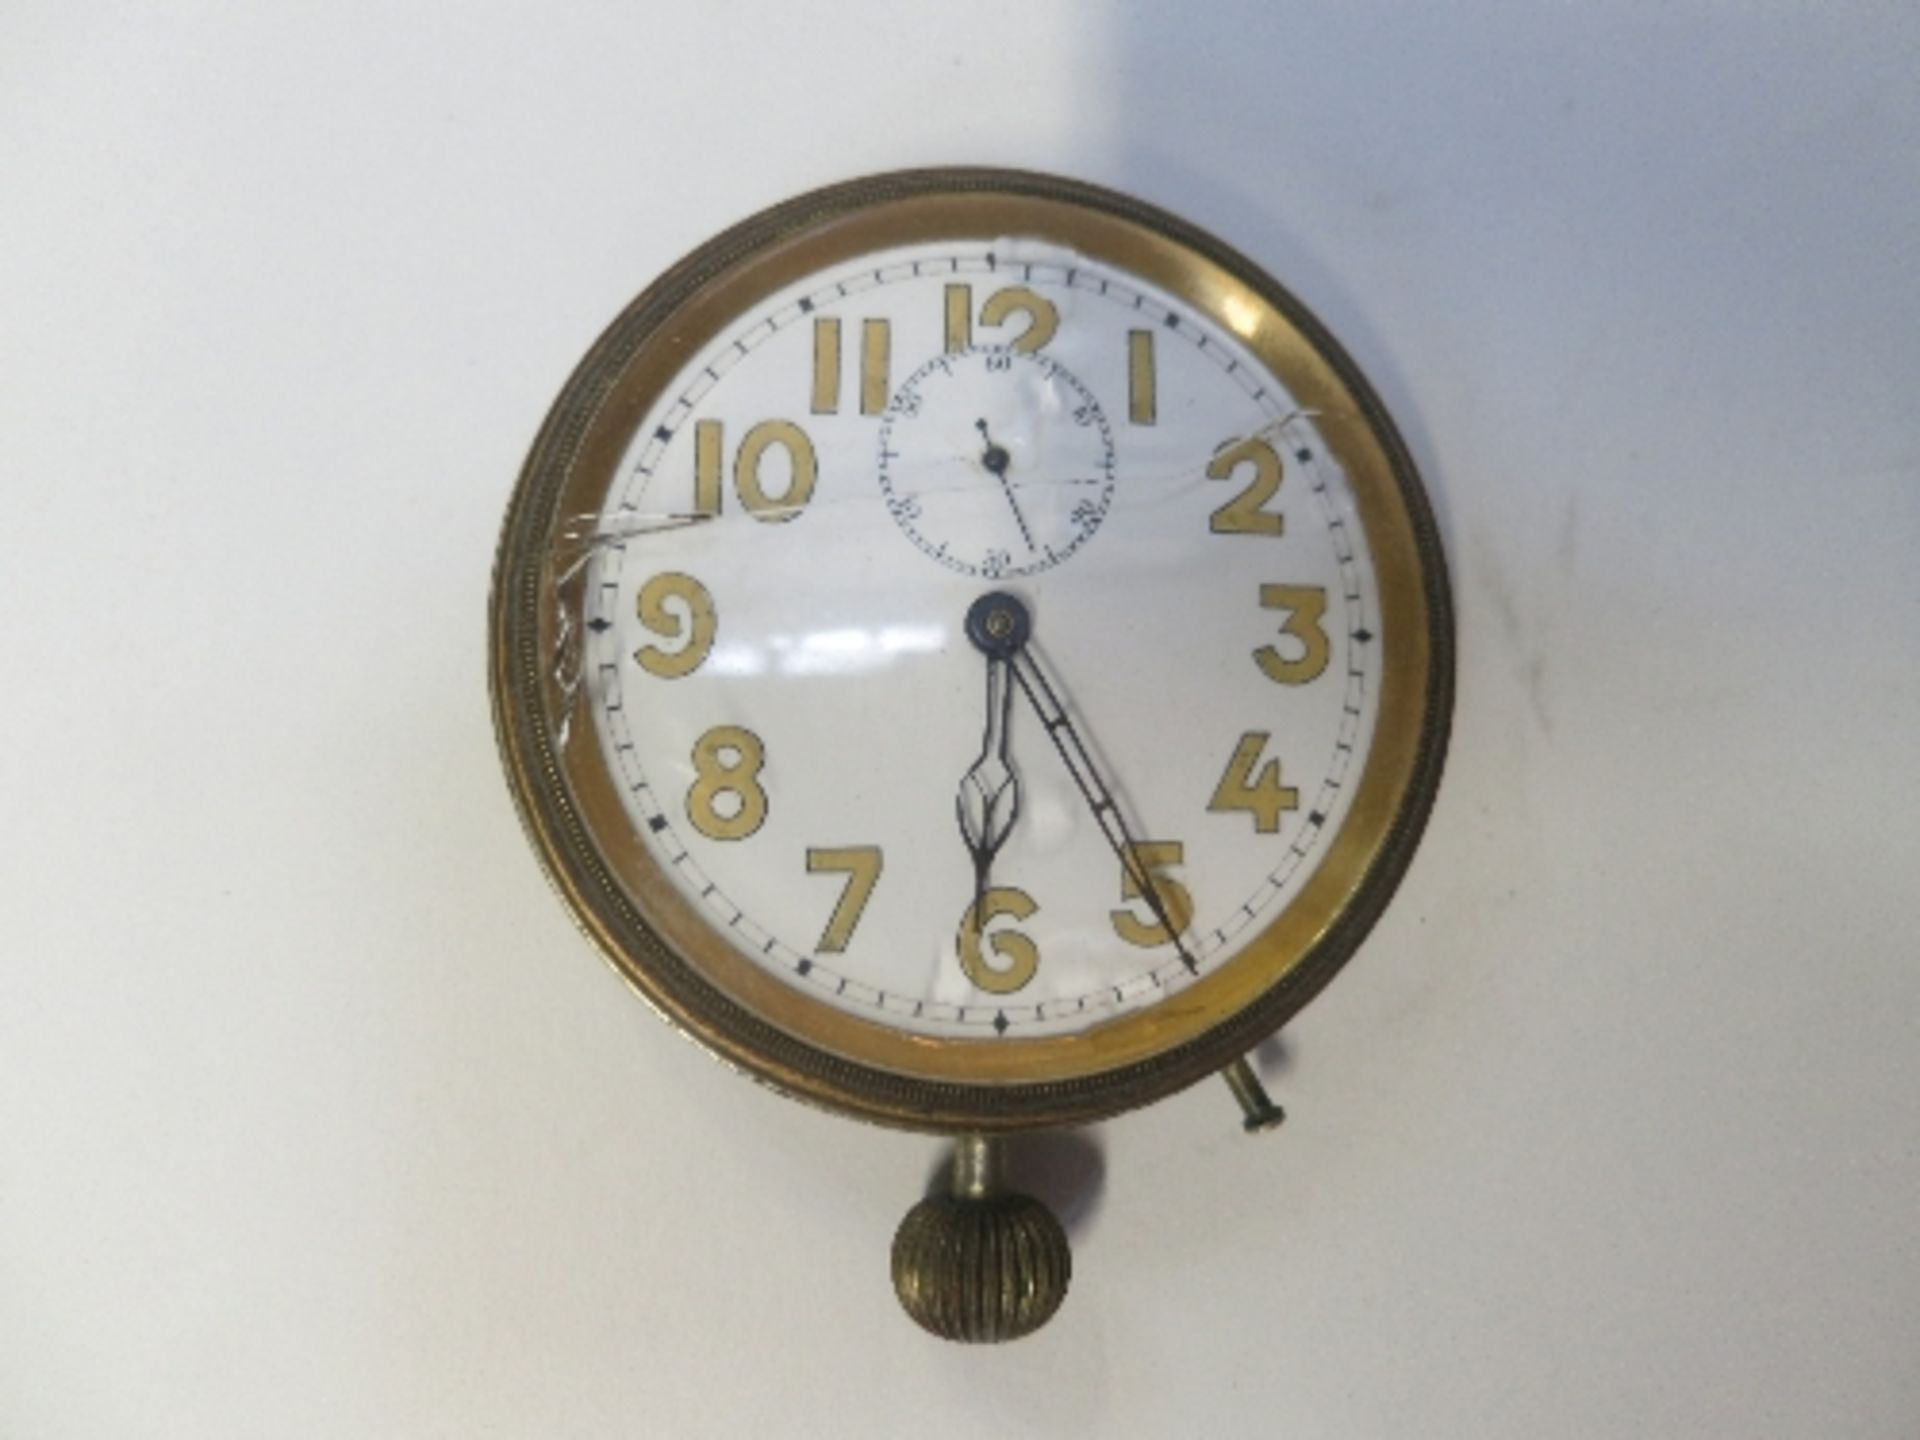 D E Pose Swiss made clock/stop watch inscribed RSAF (Royal Small Arms Factory?)